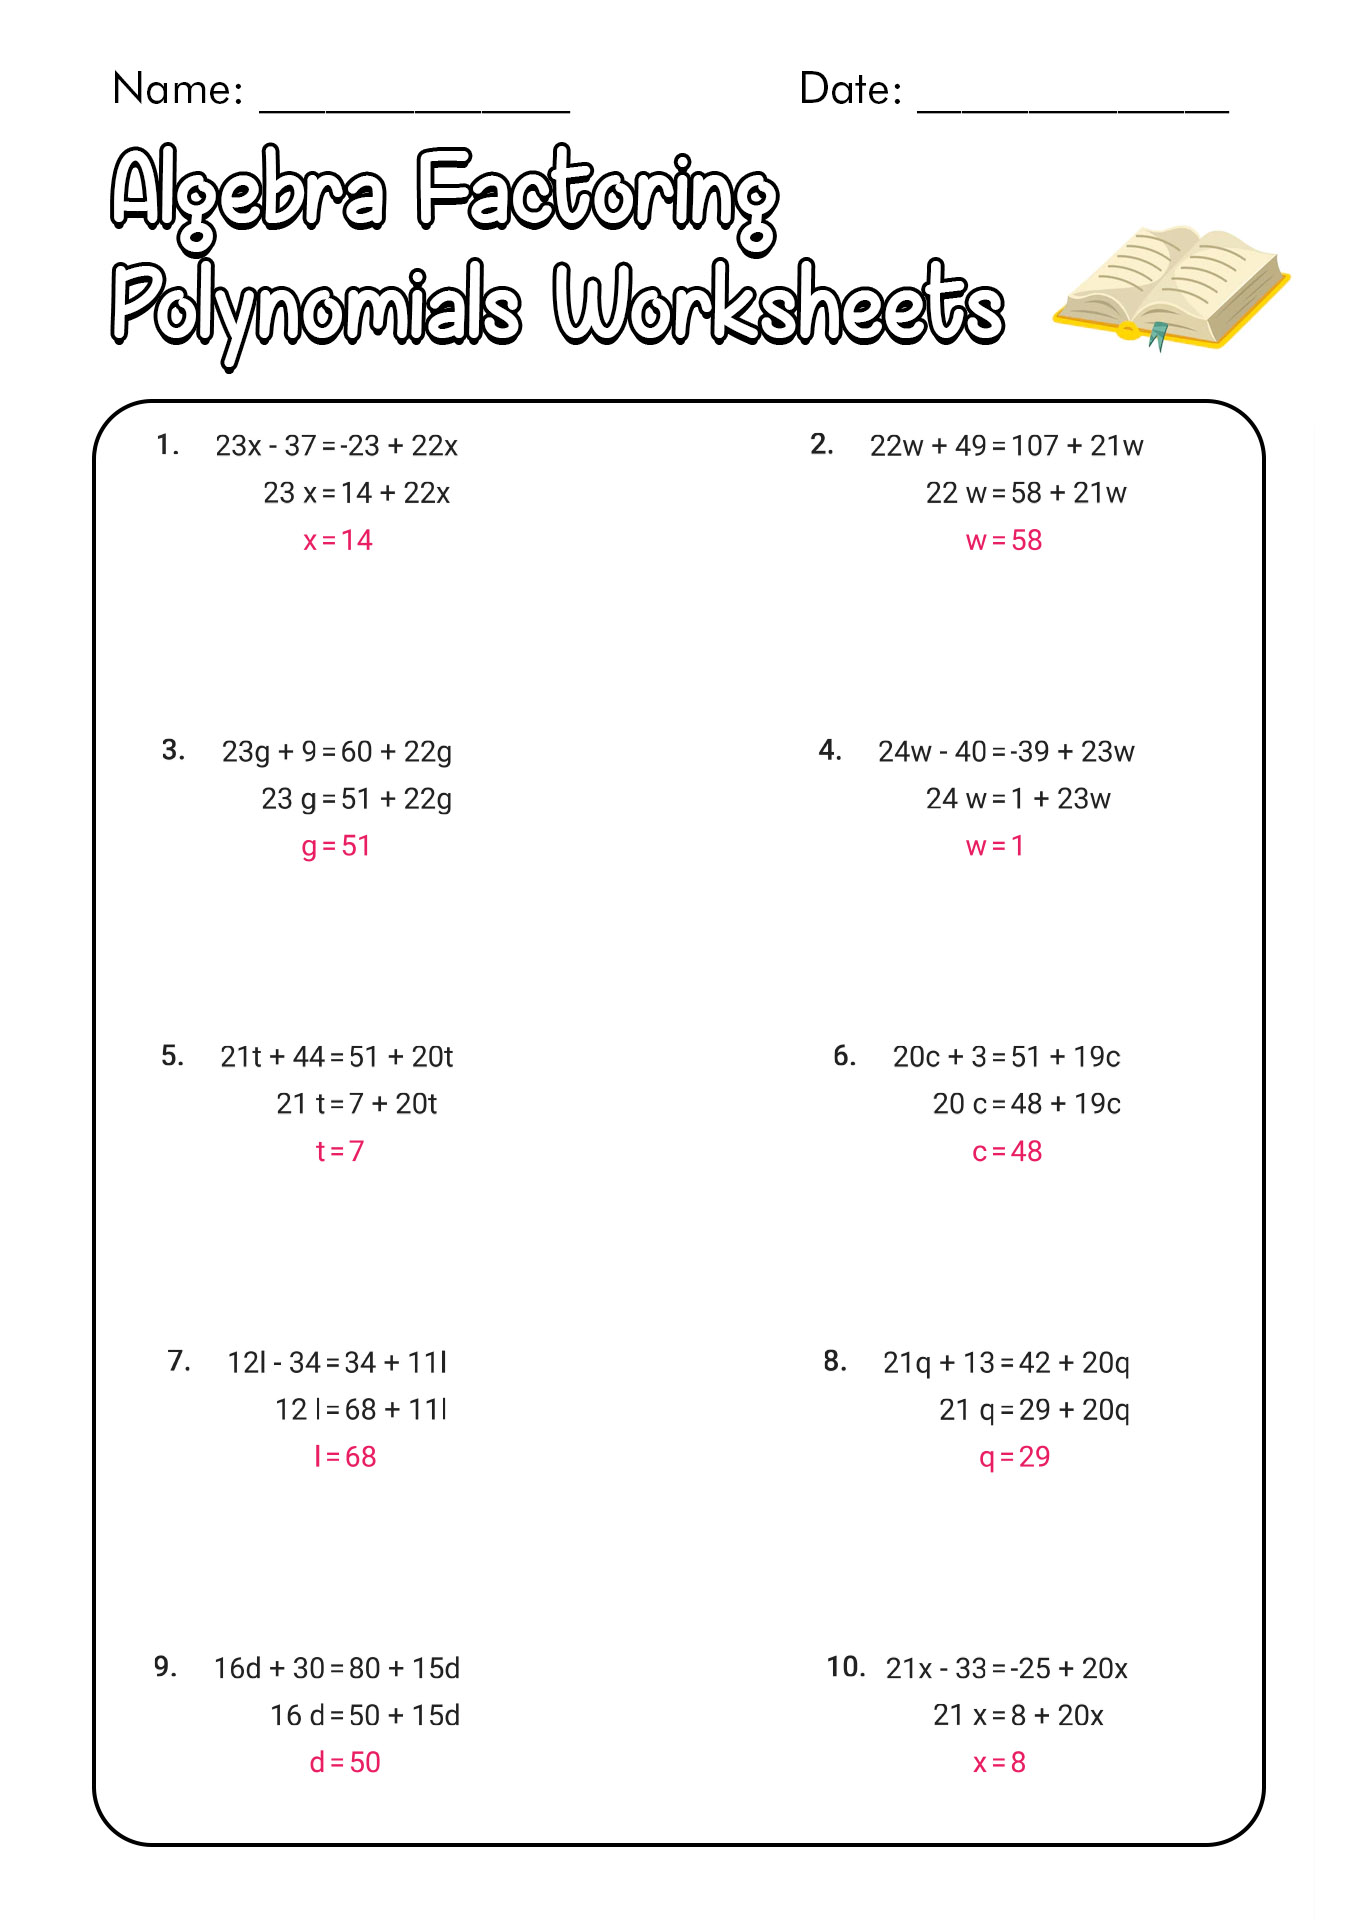 Algebra 1 Factoring Polynomials Worksheet with Answers